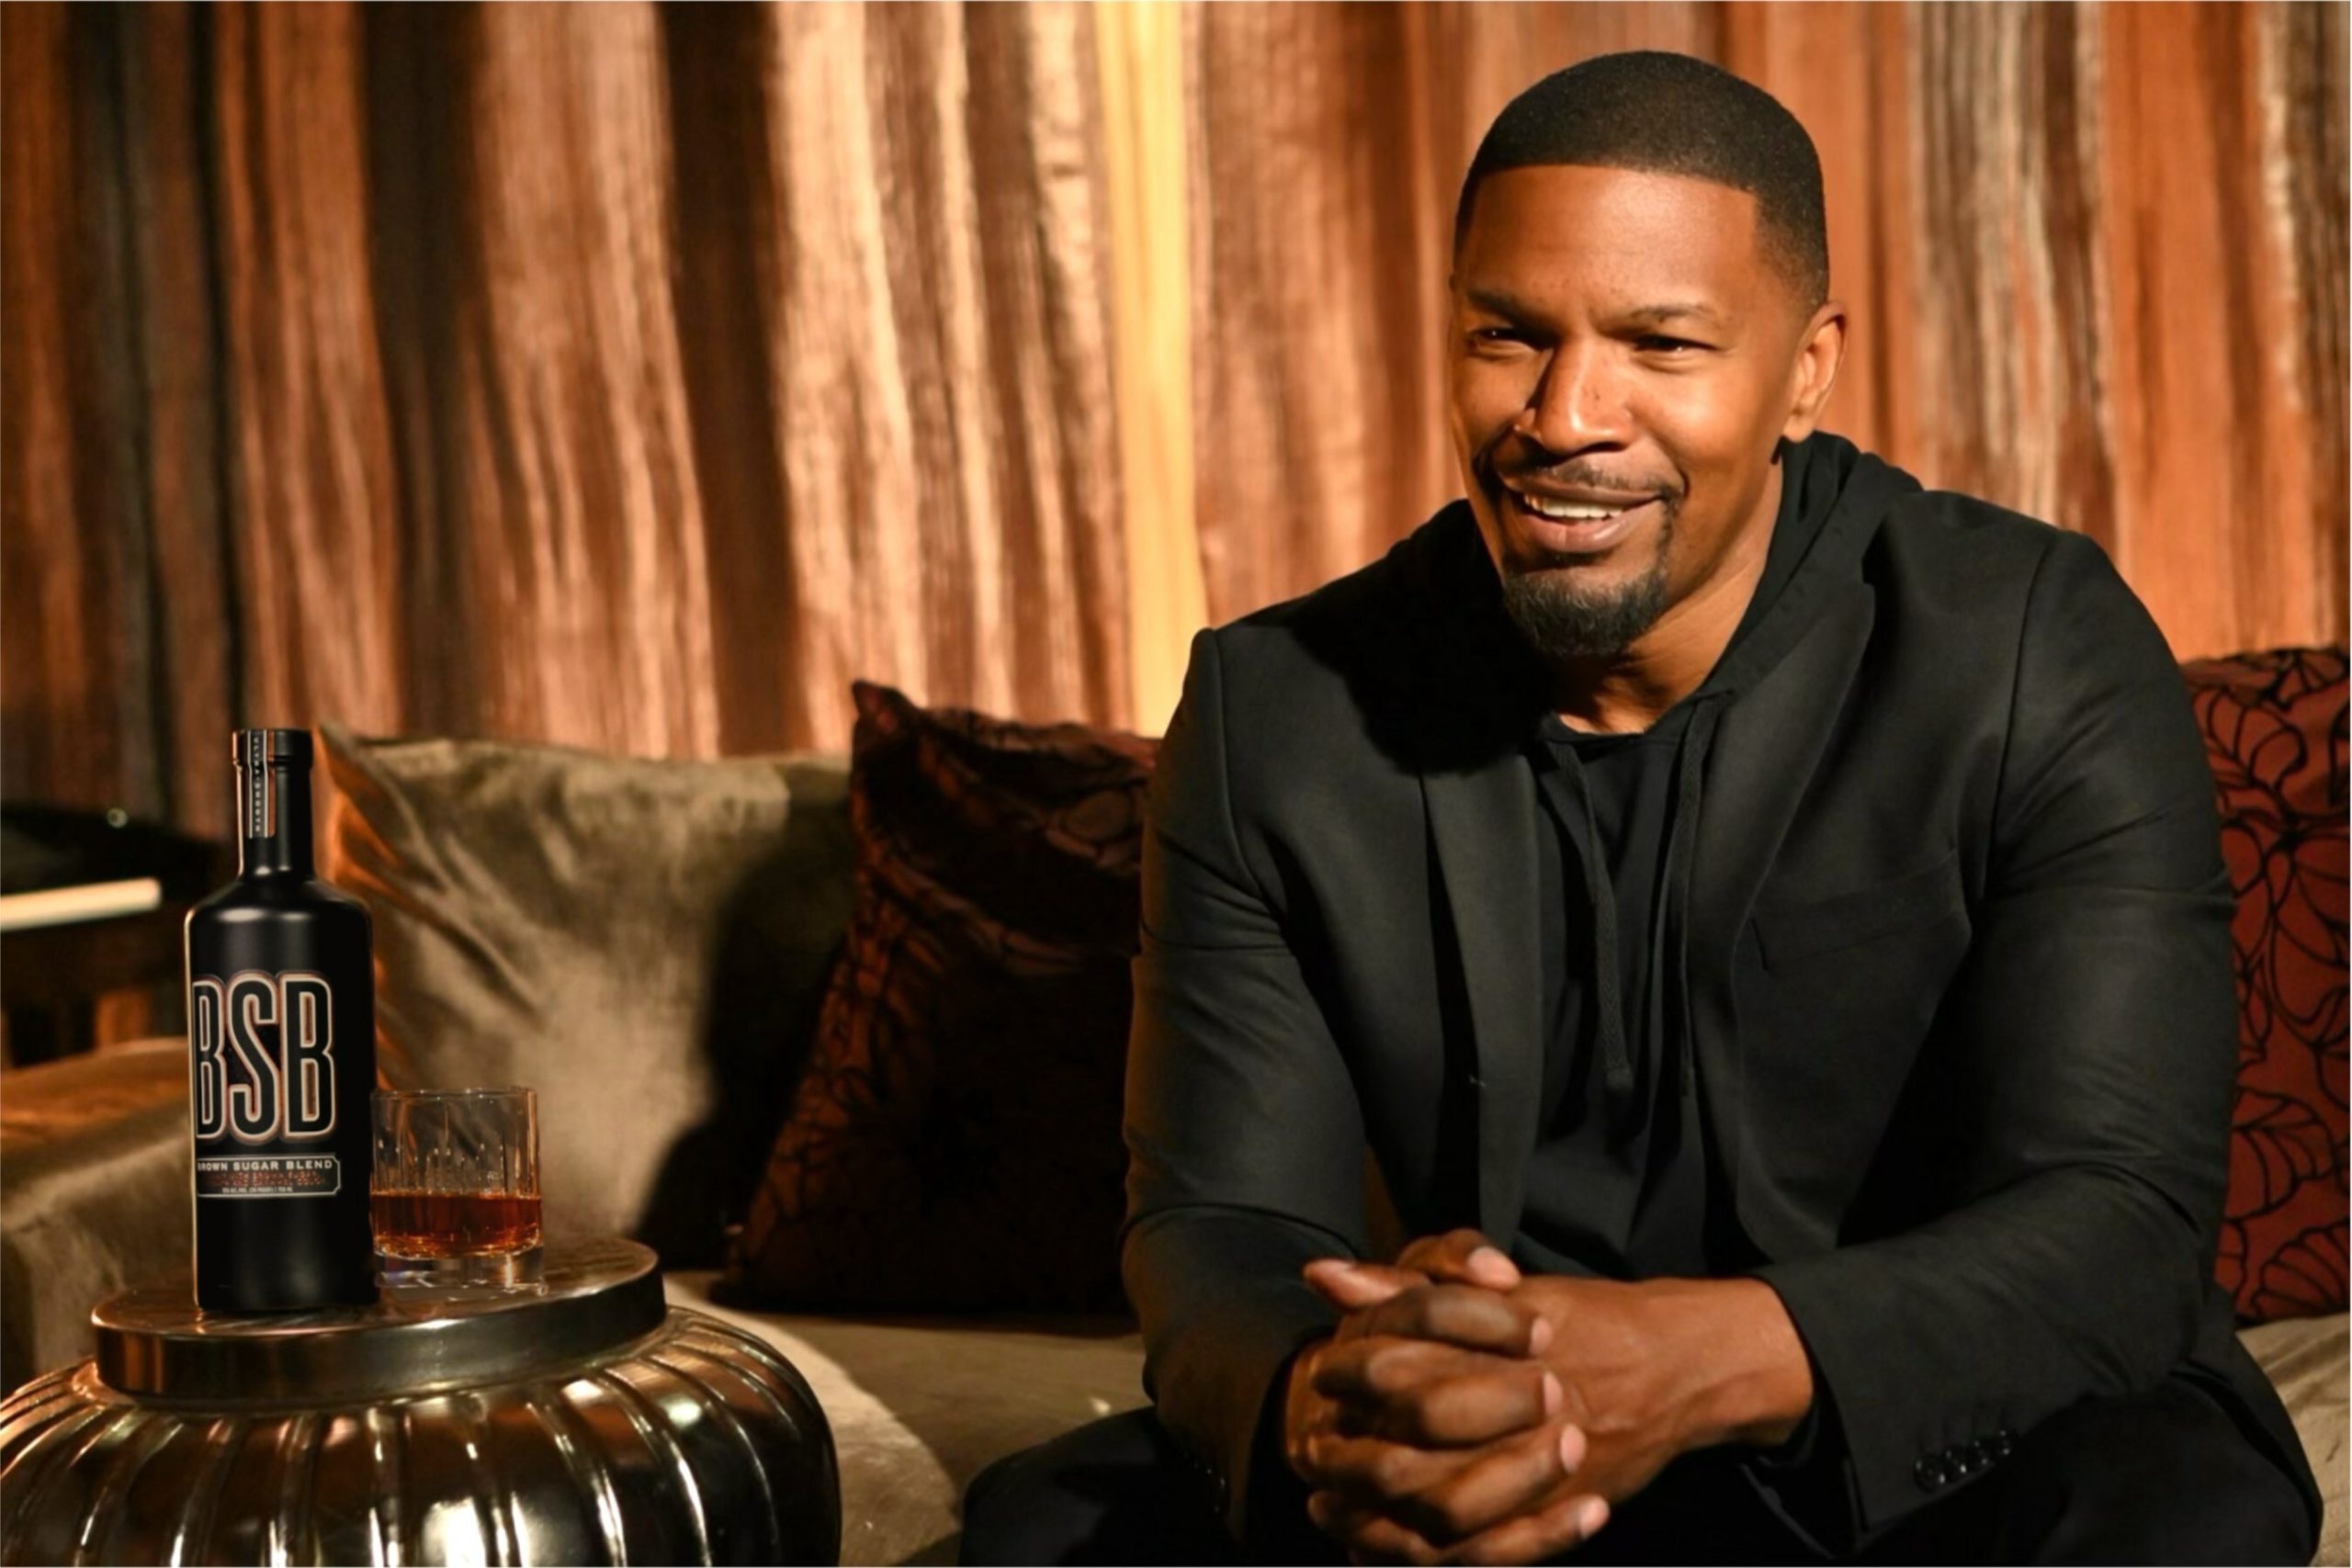 Jamie Fox brings some sweetness to the whisky industry with his new Brown Sugar Blend (BSB) Whisky